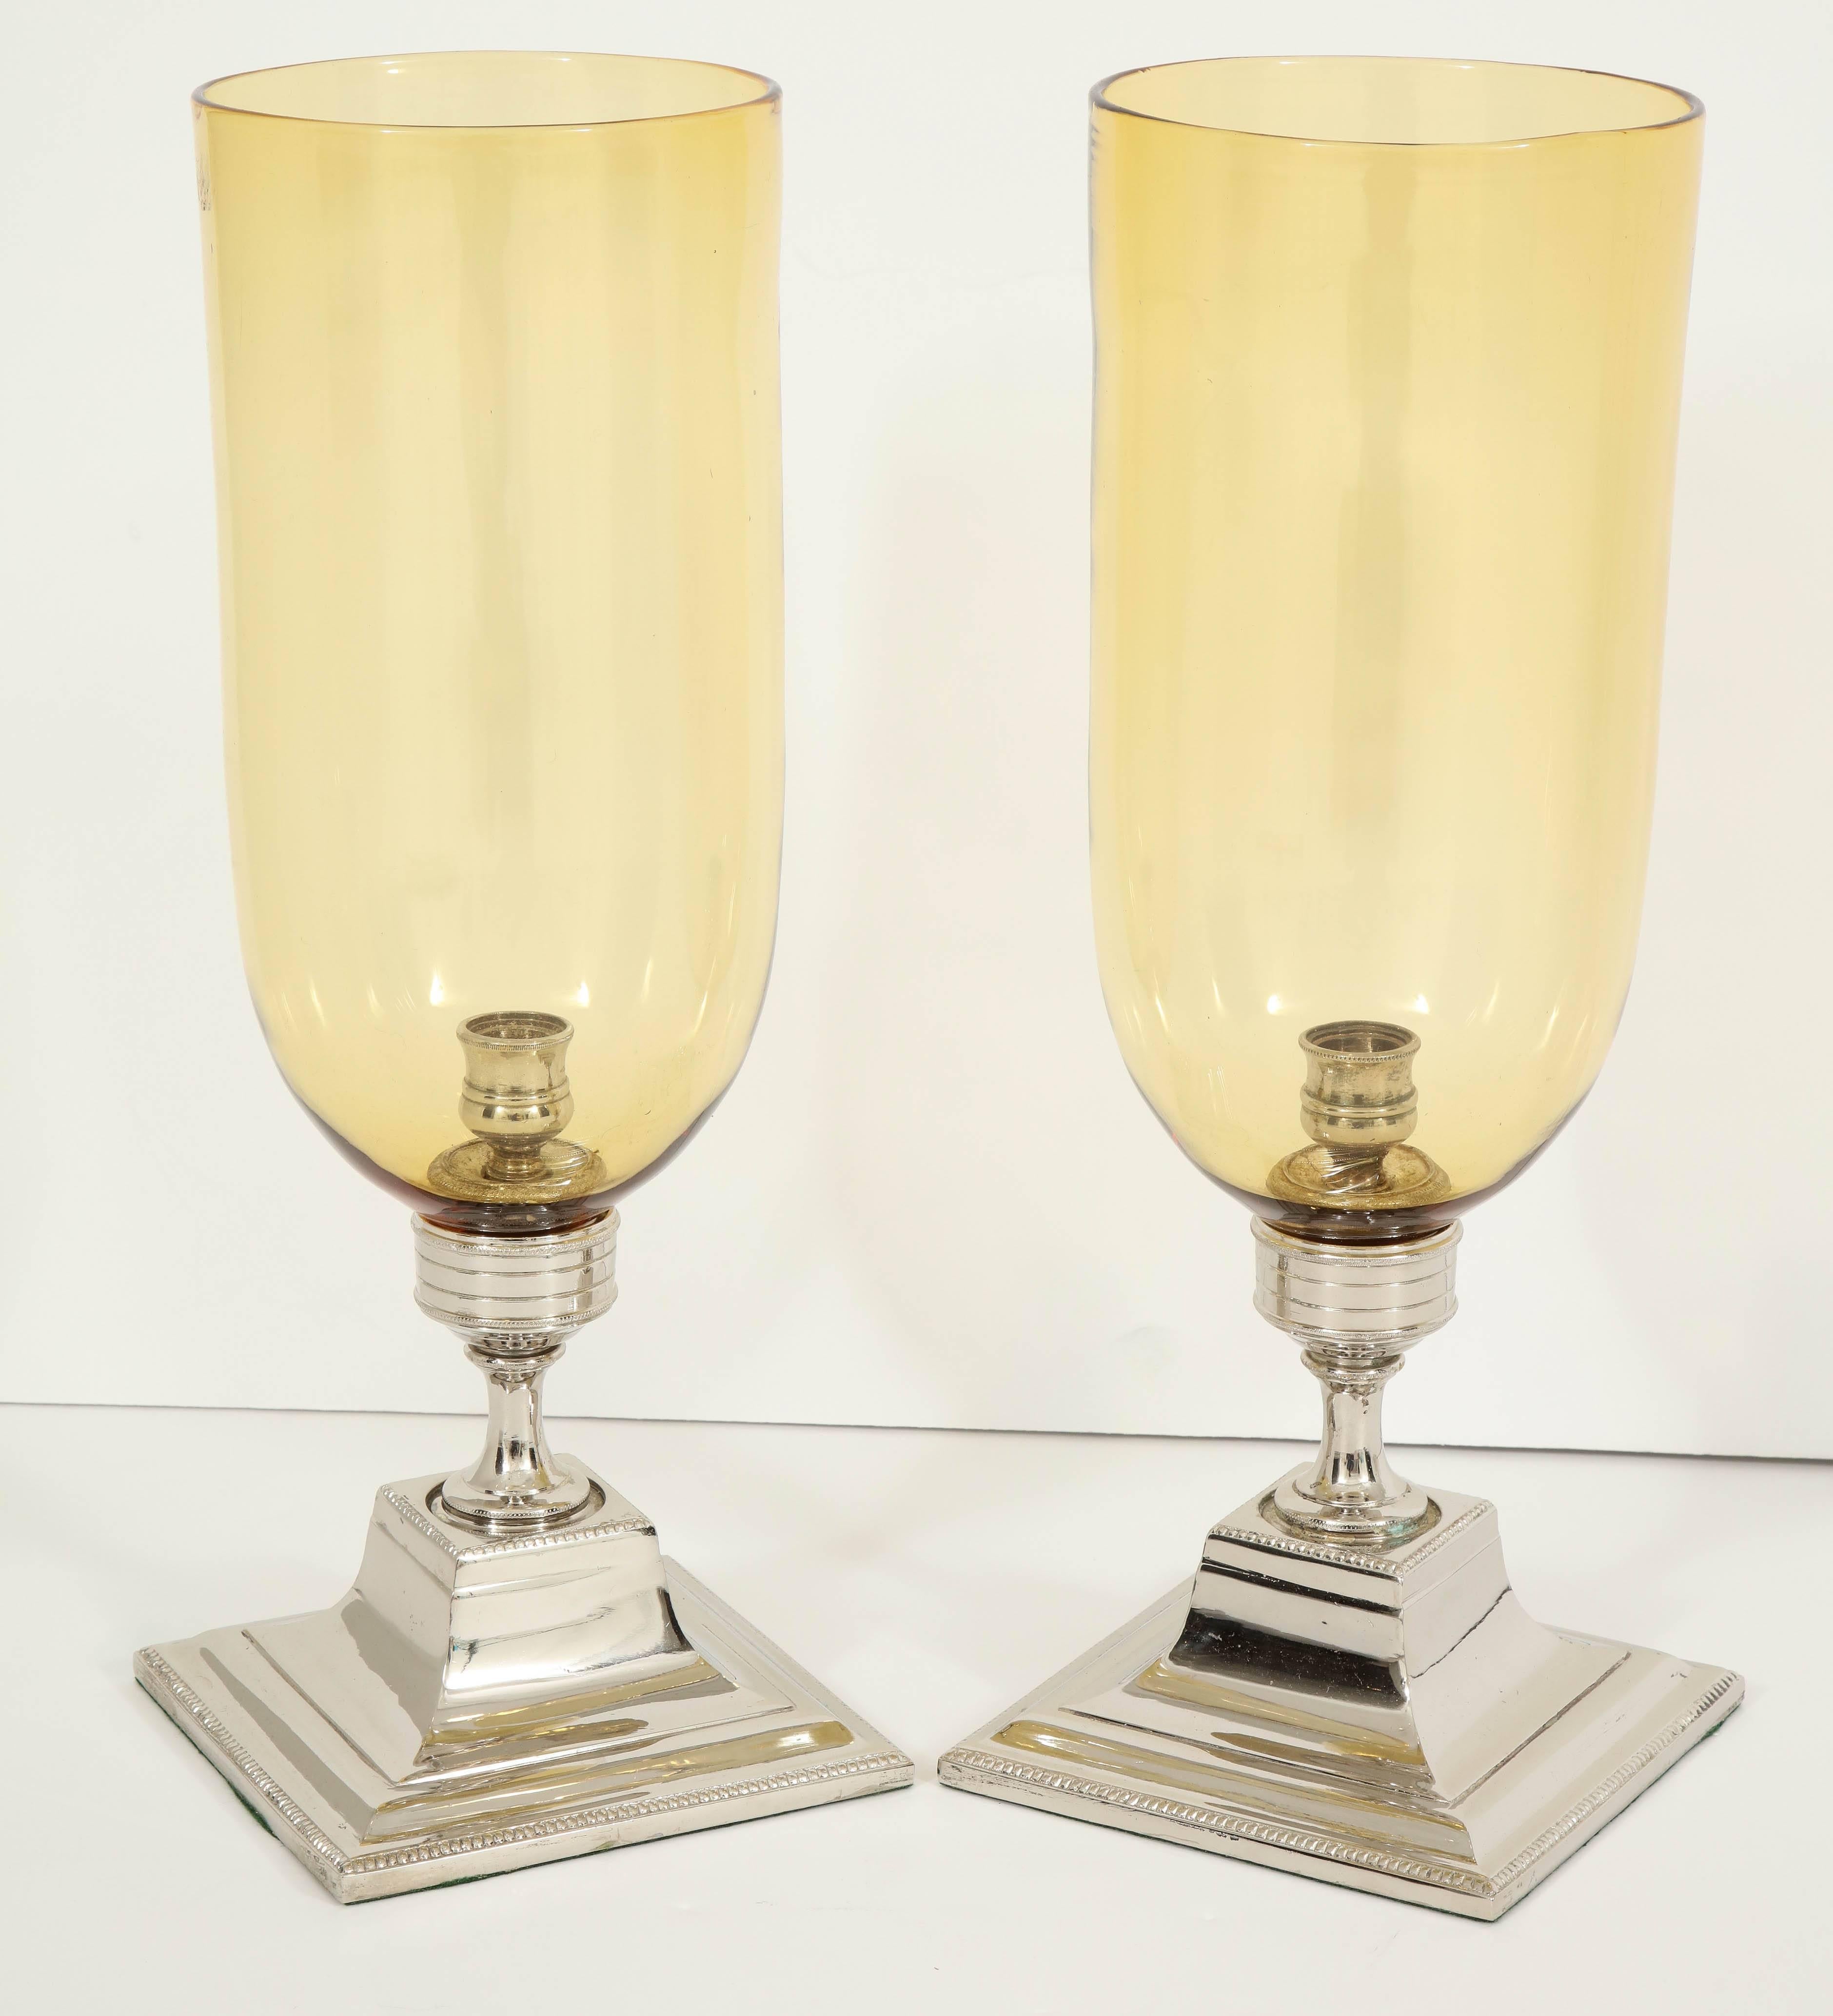 A beautiful accent for a console or dining table, this pair of amber glass hurricanes is mounted on a square, silver plate base with lovely detail.